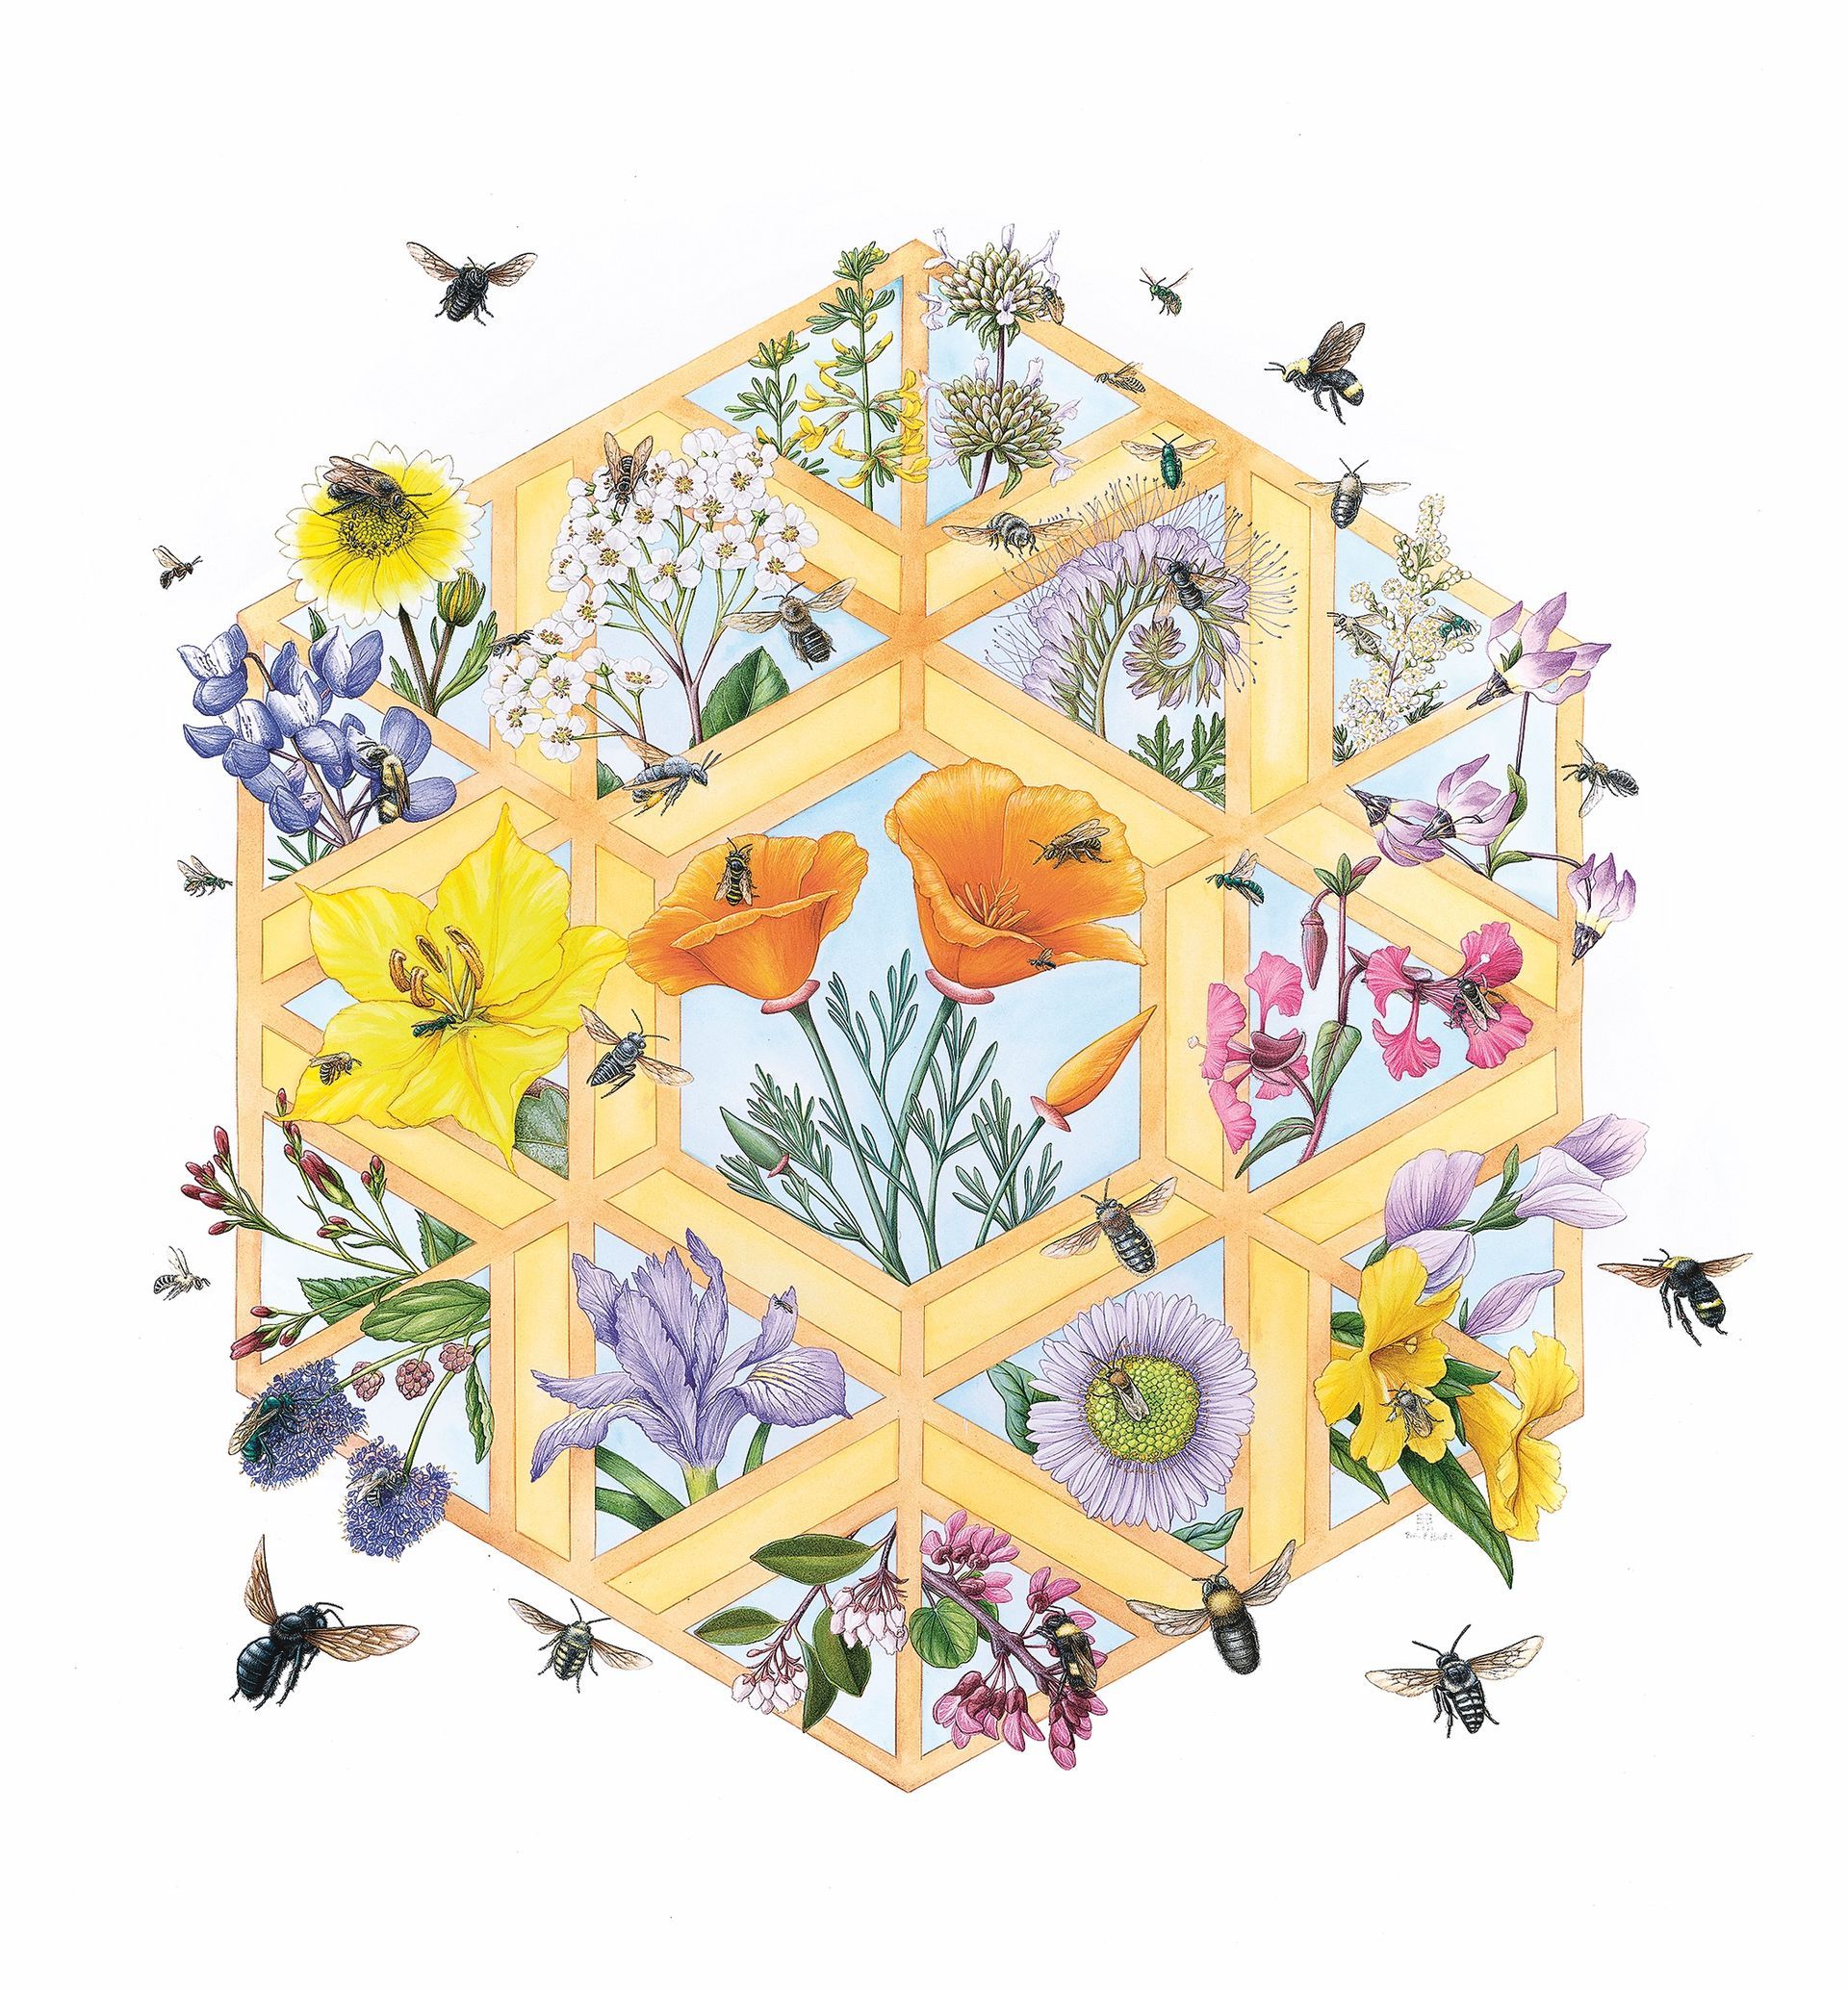 “Look Closer,” a large painting of California native bees and wildflowers.